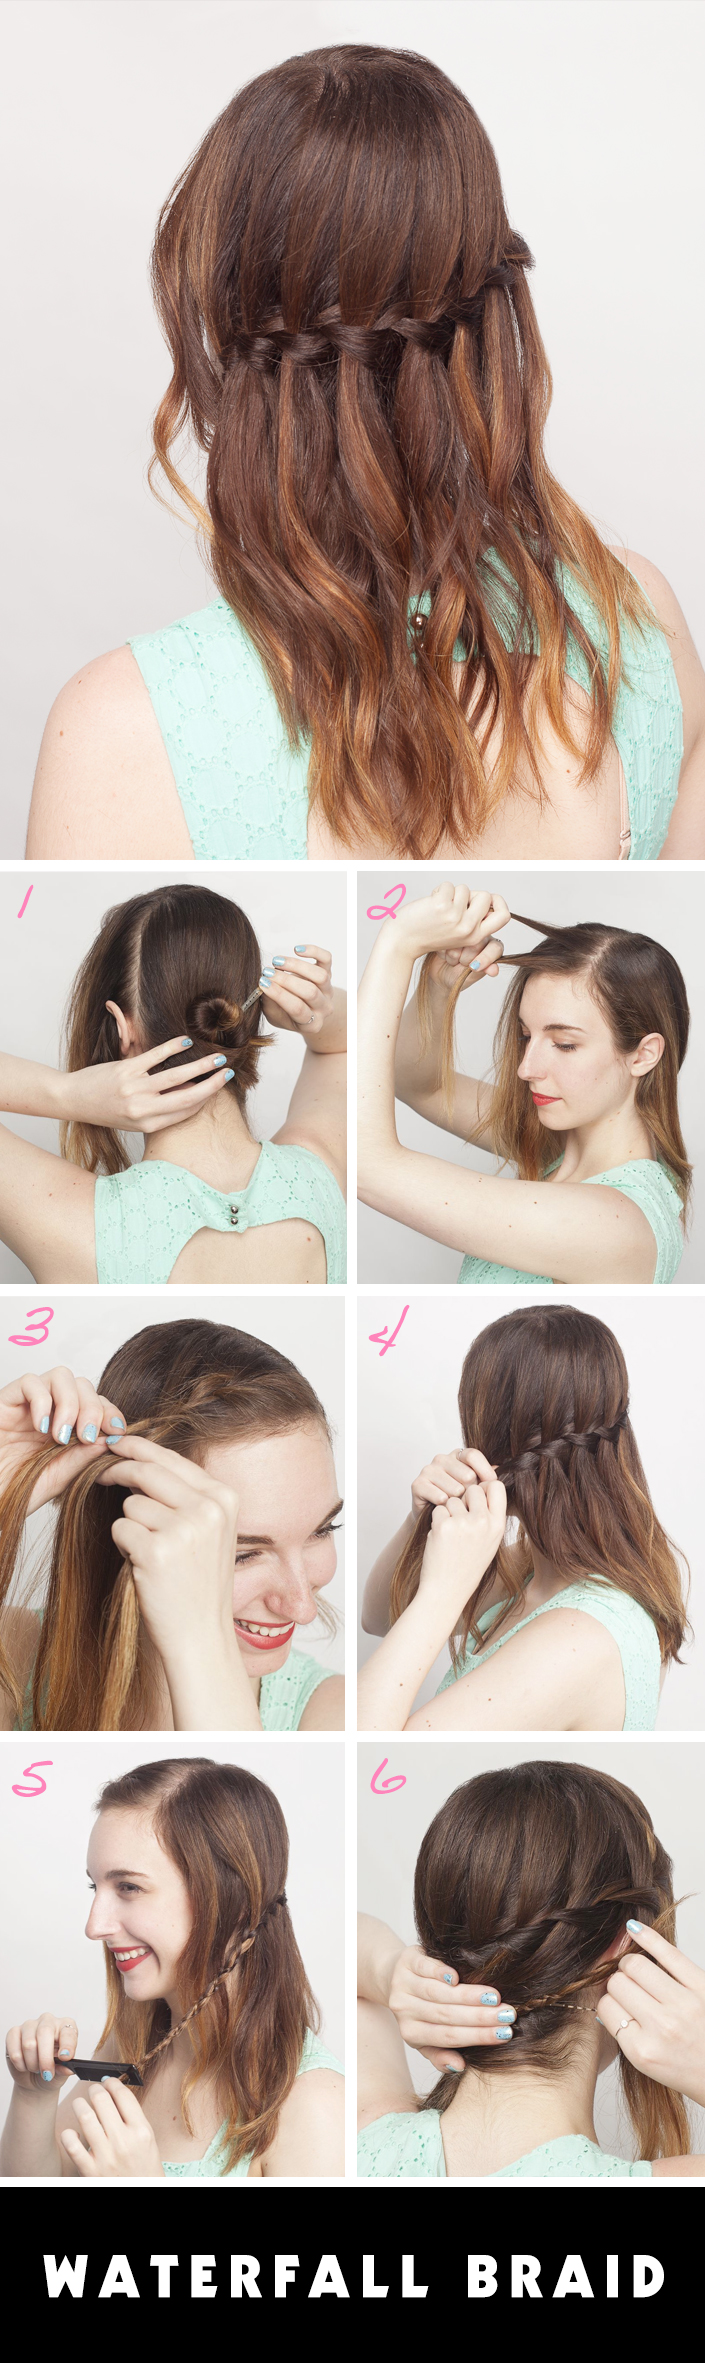 How to Do a Waterfall Braid On Yourself | StyleCaster